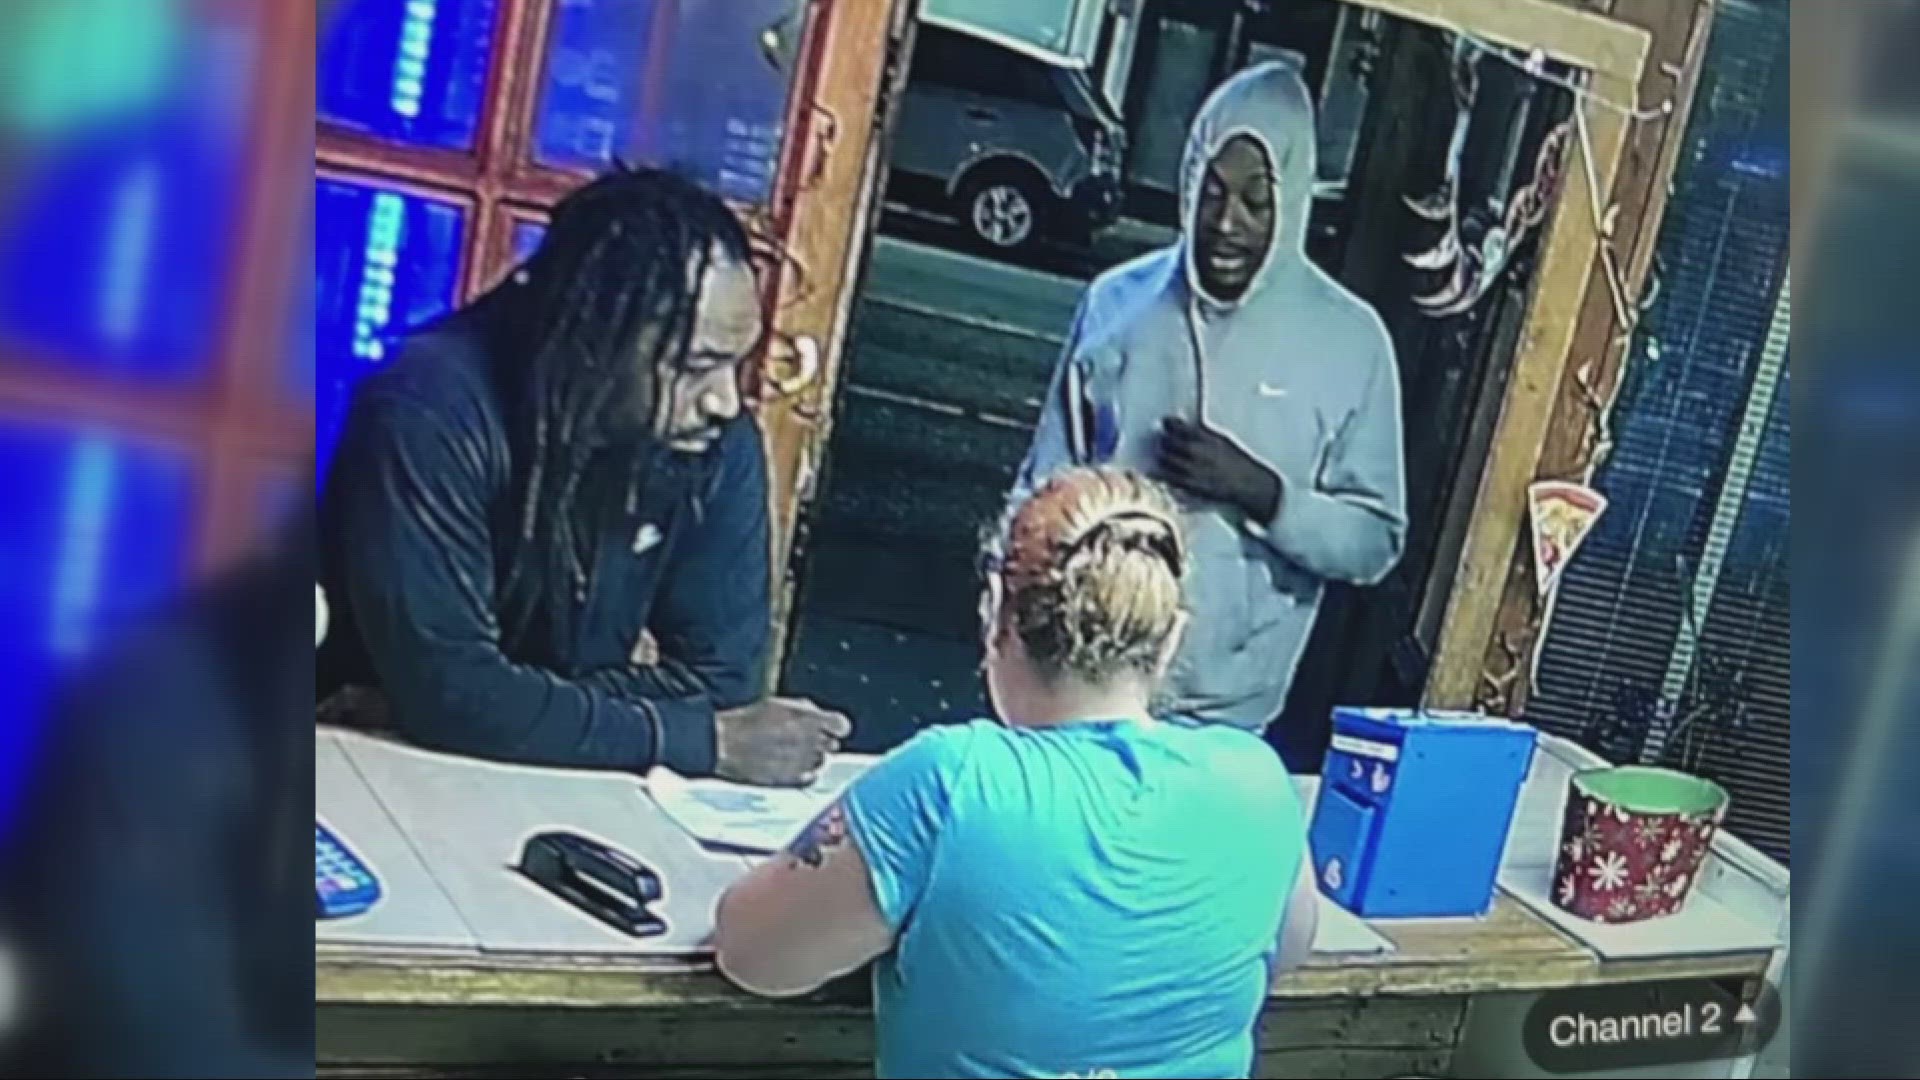 Cleveland police are asking for the public's help after workers and customers were allegedly beaten, shot at, and robbed overnight at a pizza shop.